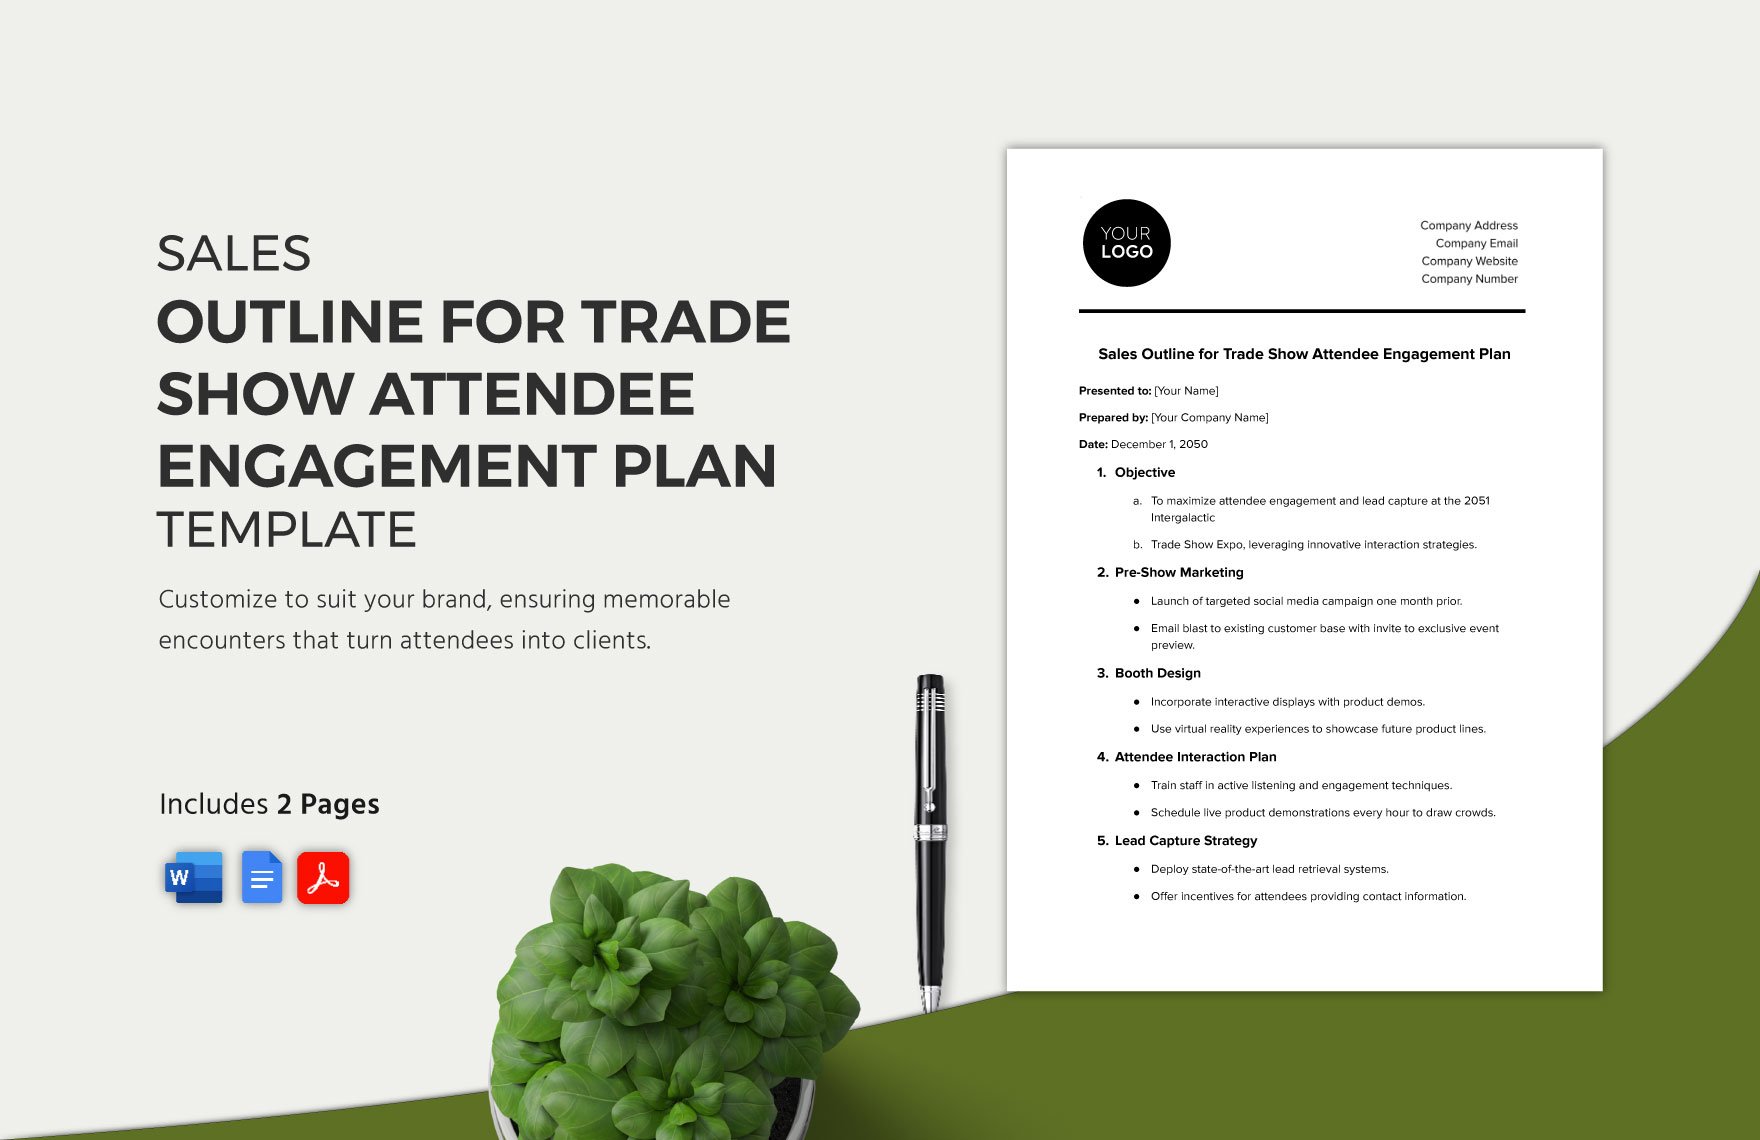 Sales Outline for Trade Show Attendee Engagement Plan Template